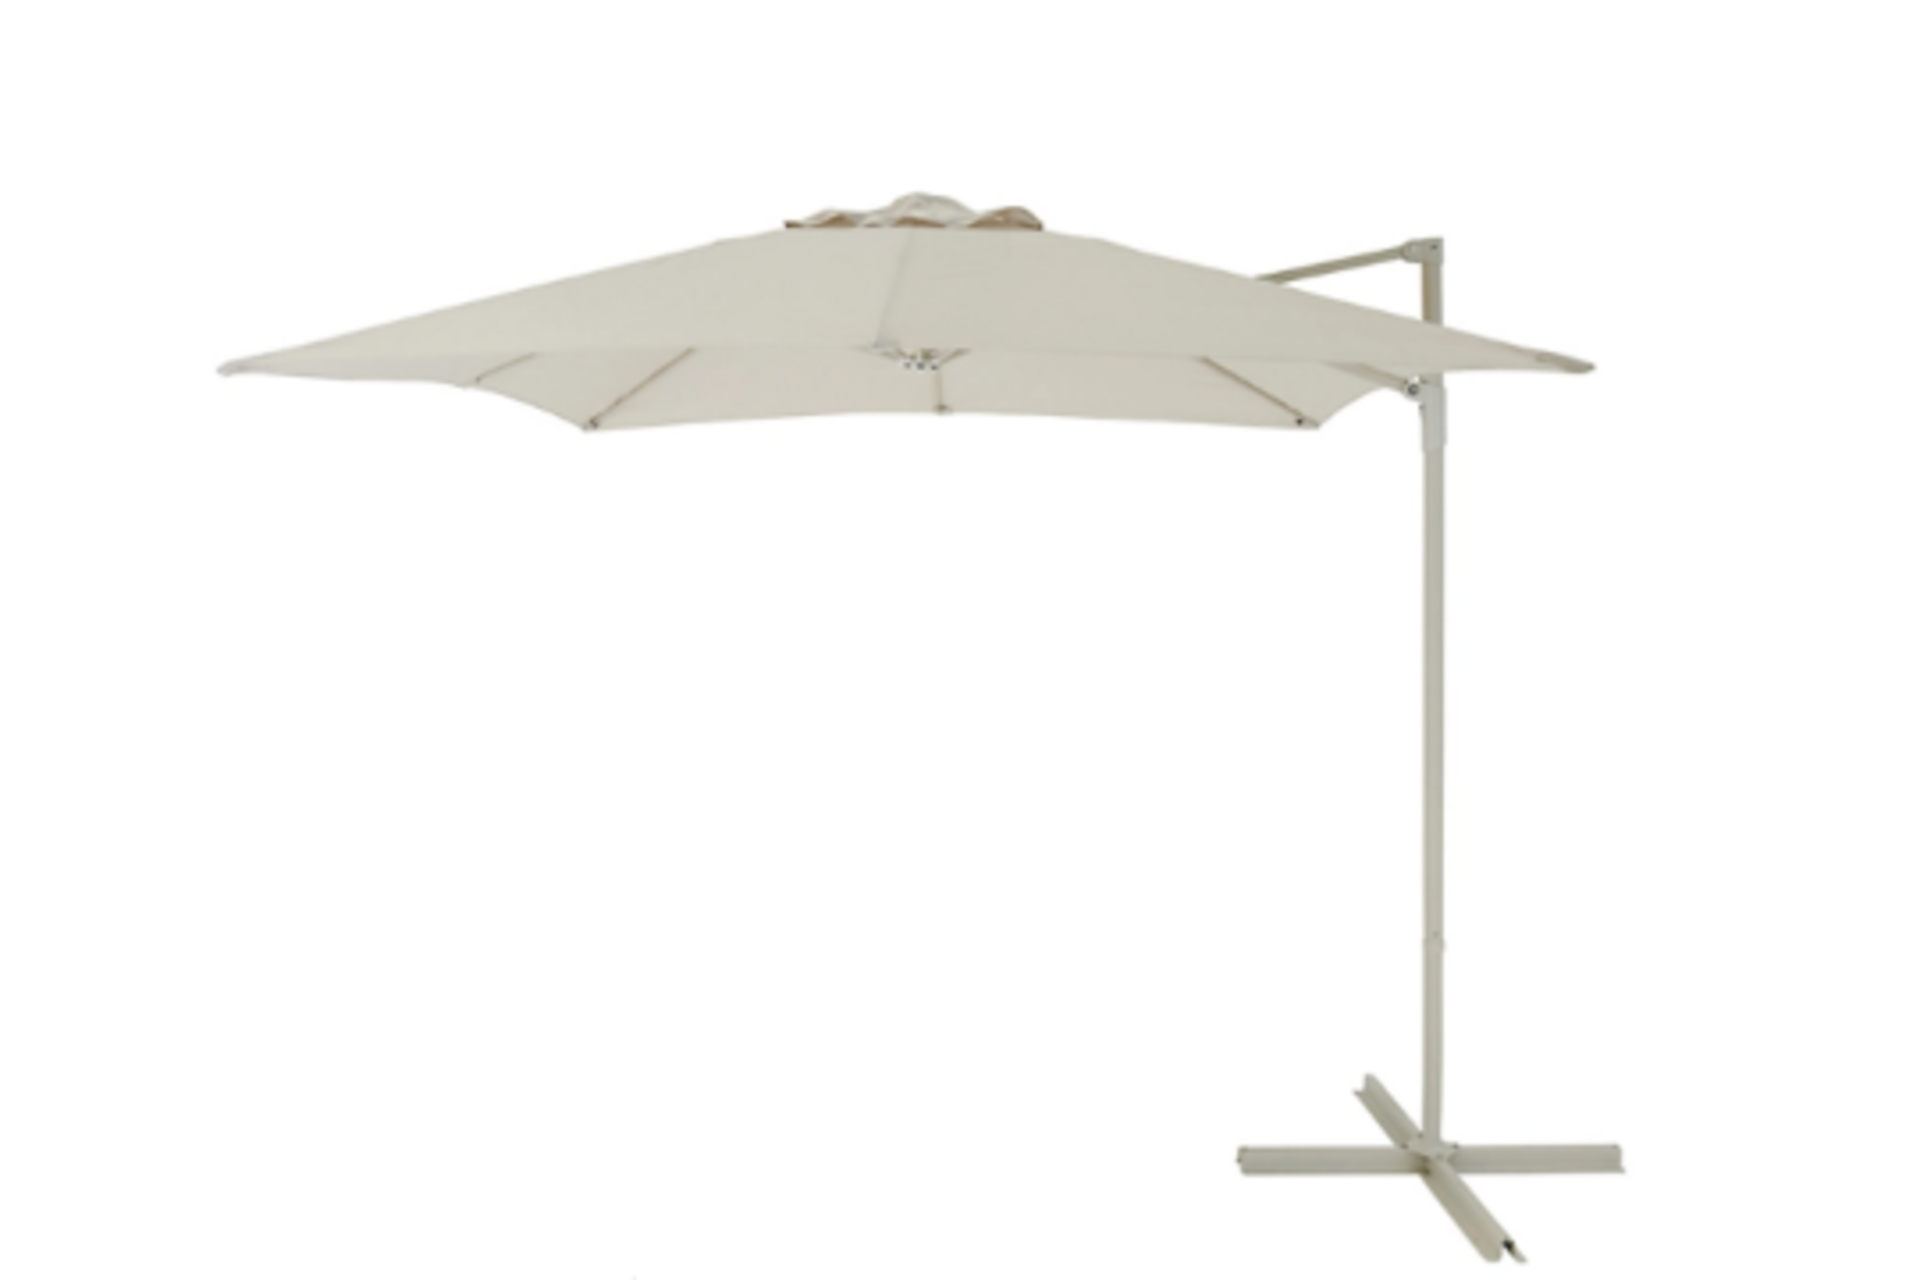 Trade Lot 5 x New & Boxed Luxury 2.5m Sand Overhanging Parasol- Sand. This square overhanging